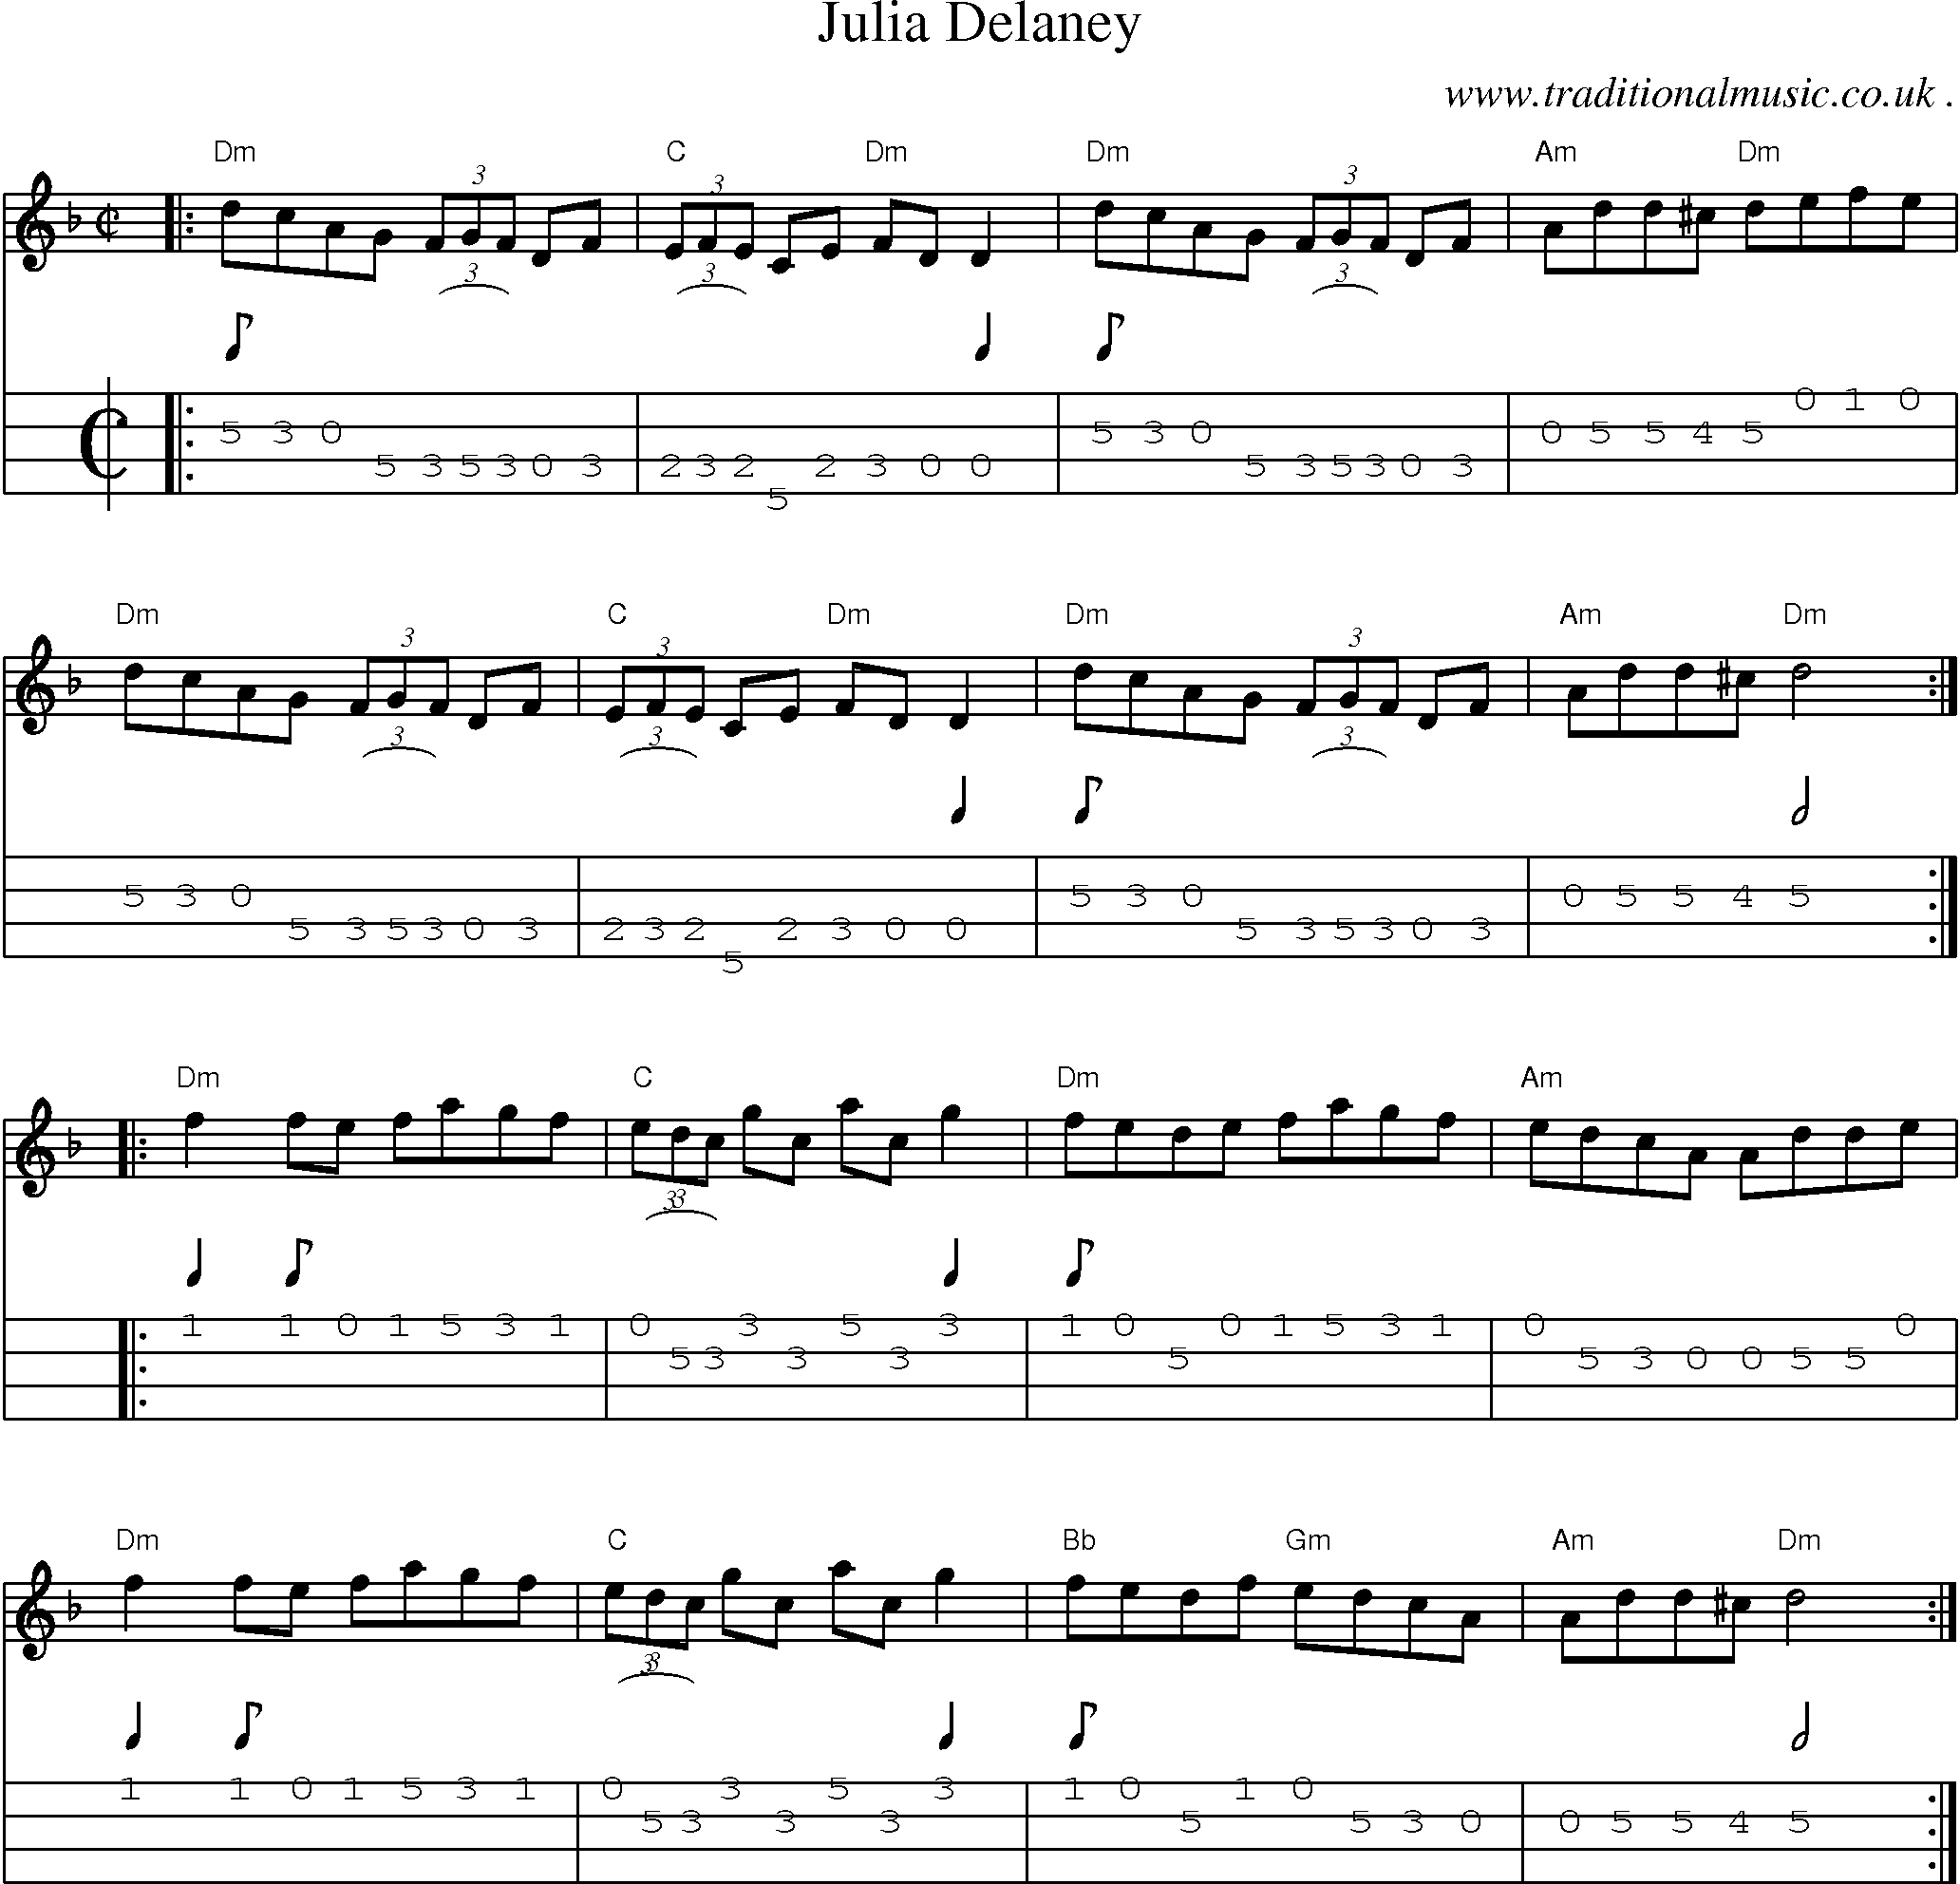 Music Score and Guitar Tabs for Julia Delaney